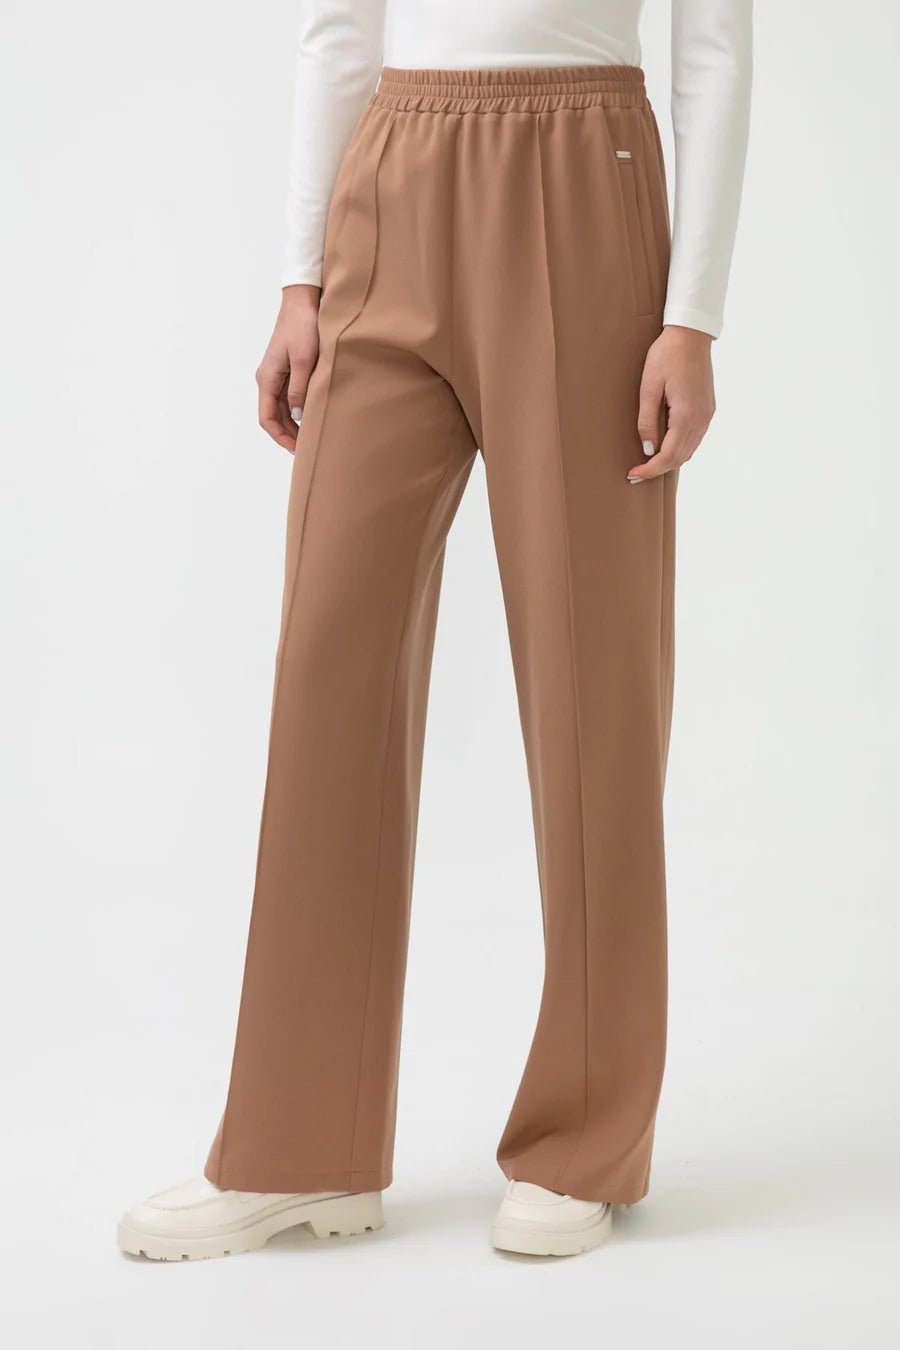 New Womens Ribbed Flare Trousers Wide Leg Ladies Trousers Size 814 UK   eBay